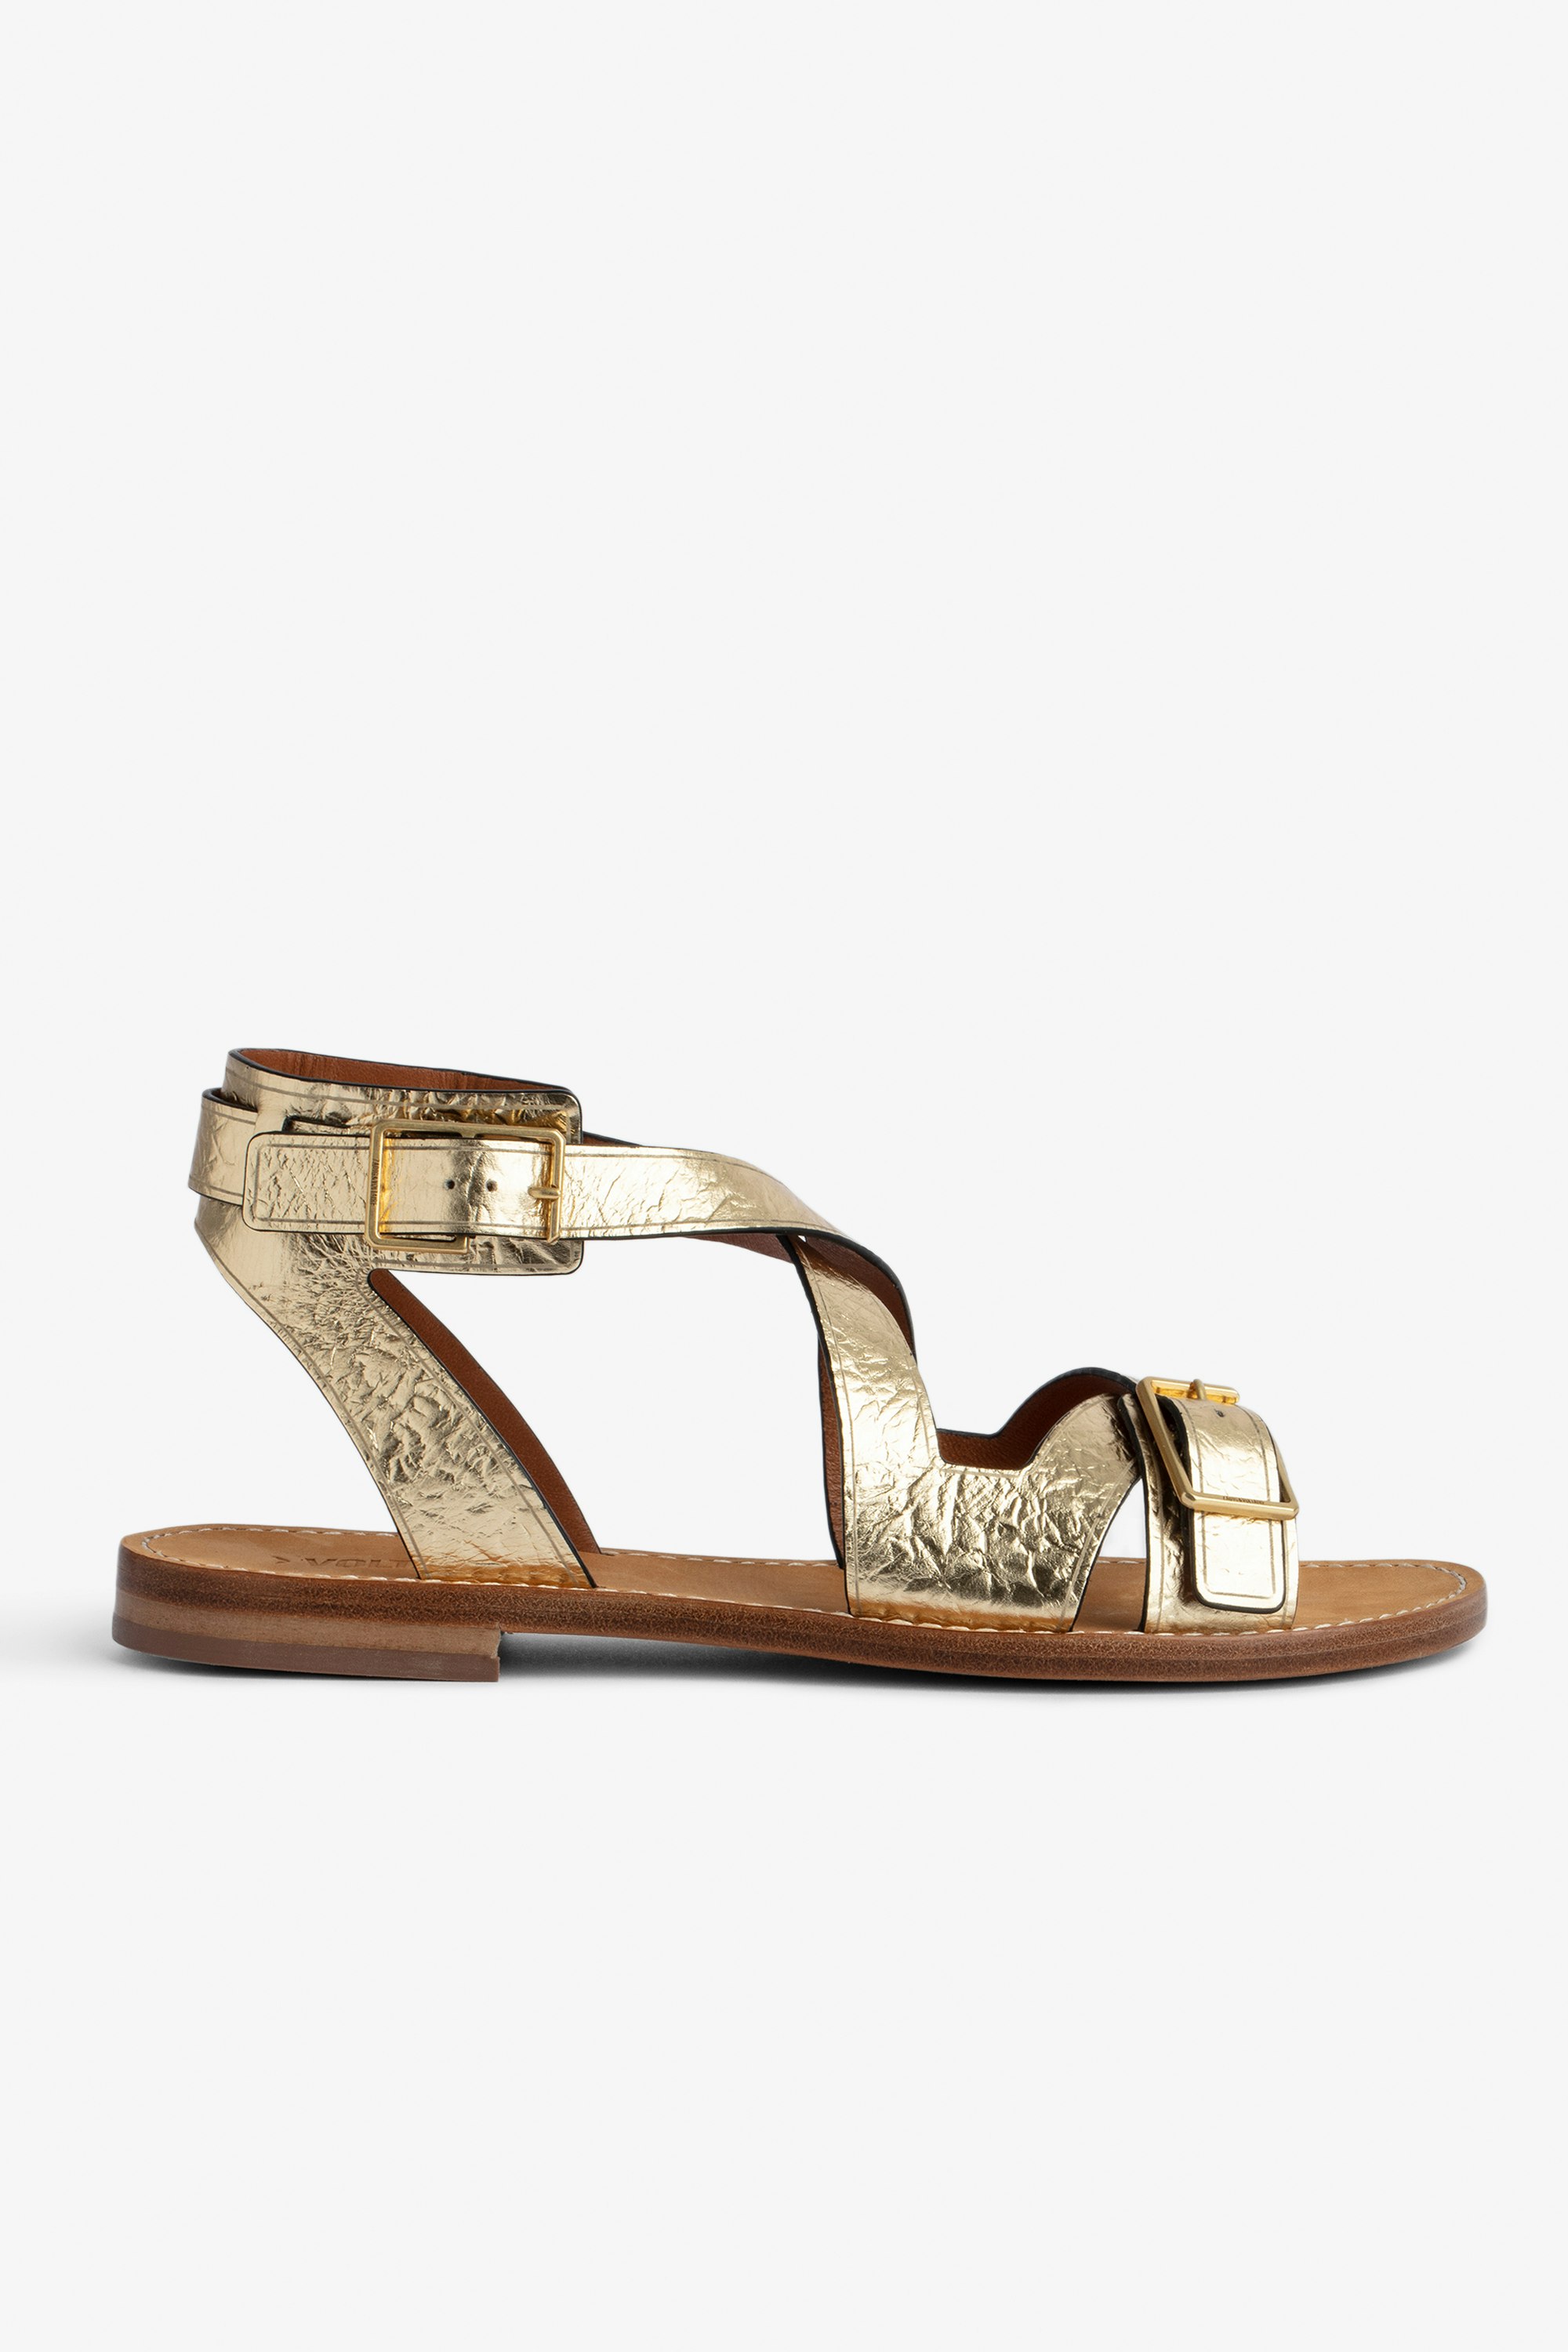 Cecilia Caprese Sandals Women's sandals in metallic, crinkled leather with straps and C-shaped buckles